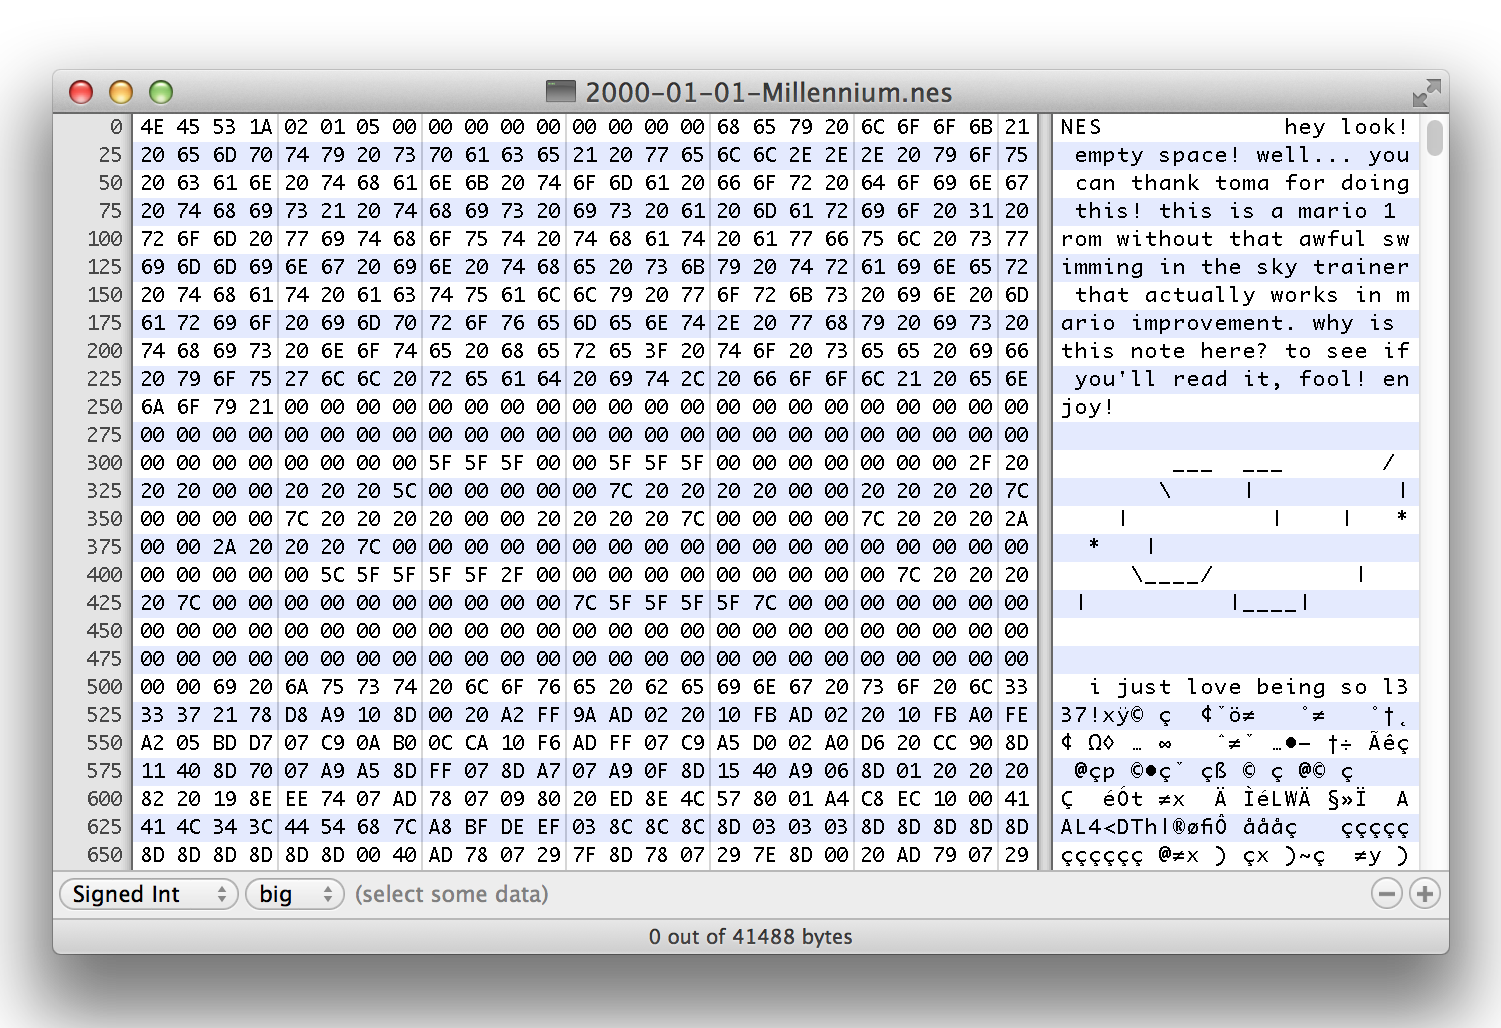 This screenshot of Hexcode from the Mario Millennium mod depicts non-executable comments in American Standard Code for Information Exchange (ASCII) character encoding standard